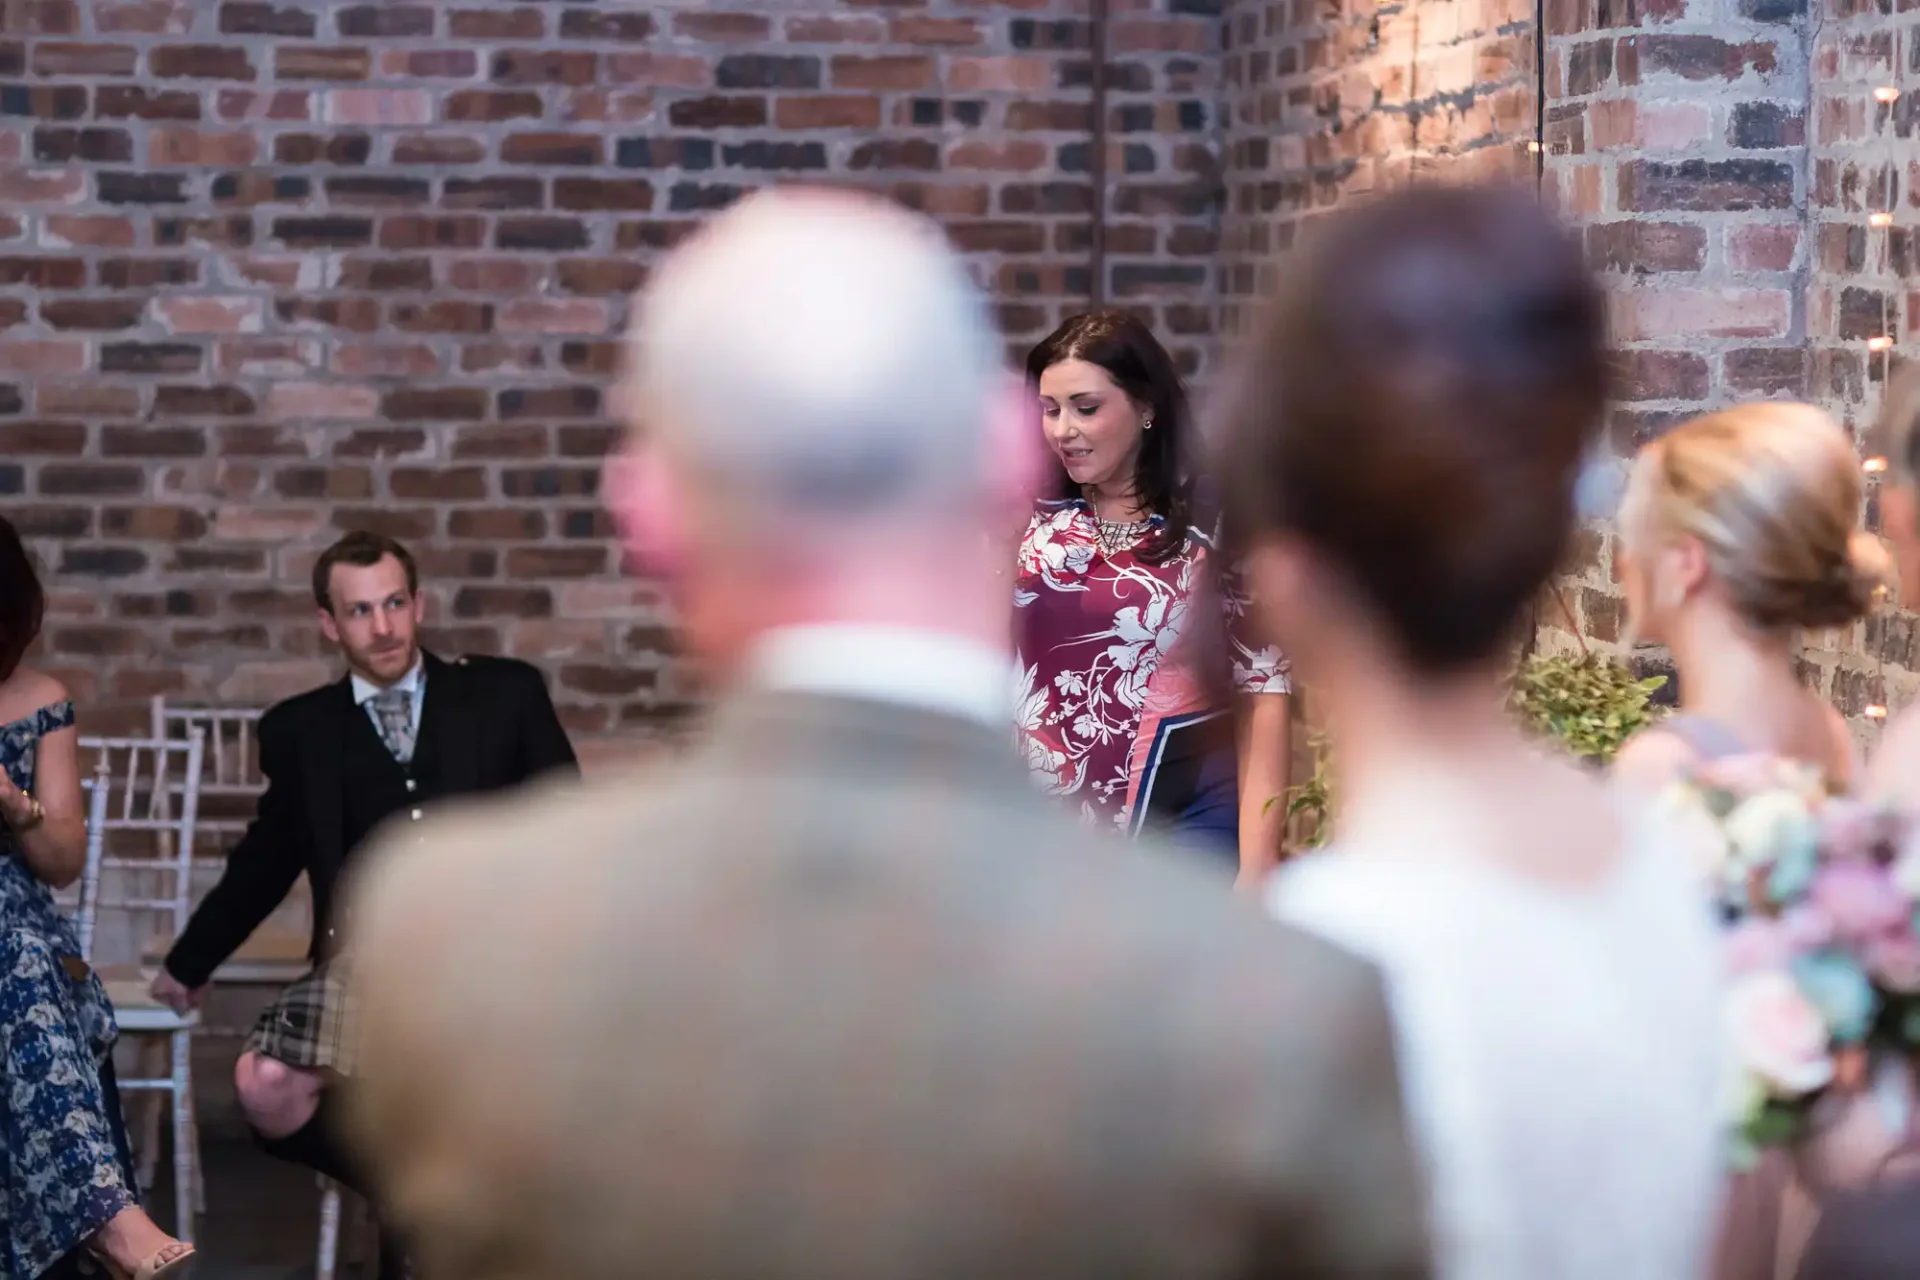 A woman speaks at a wedding, partially obscured by guests, in a room with brick walls and soft lighting.